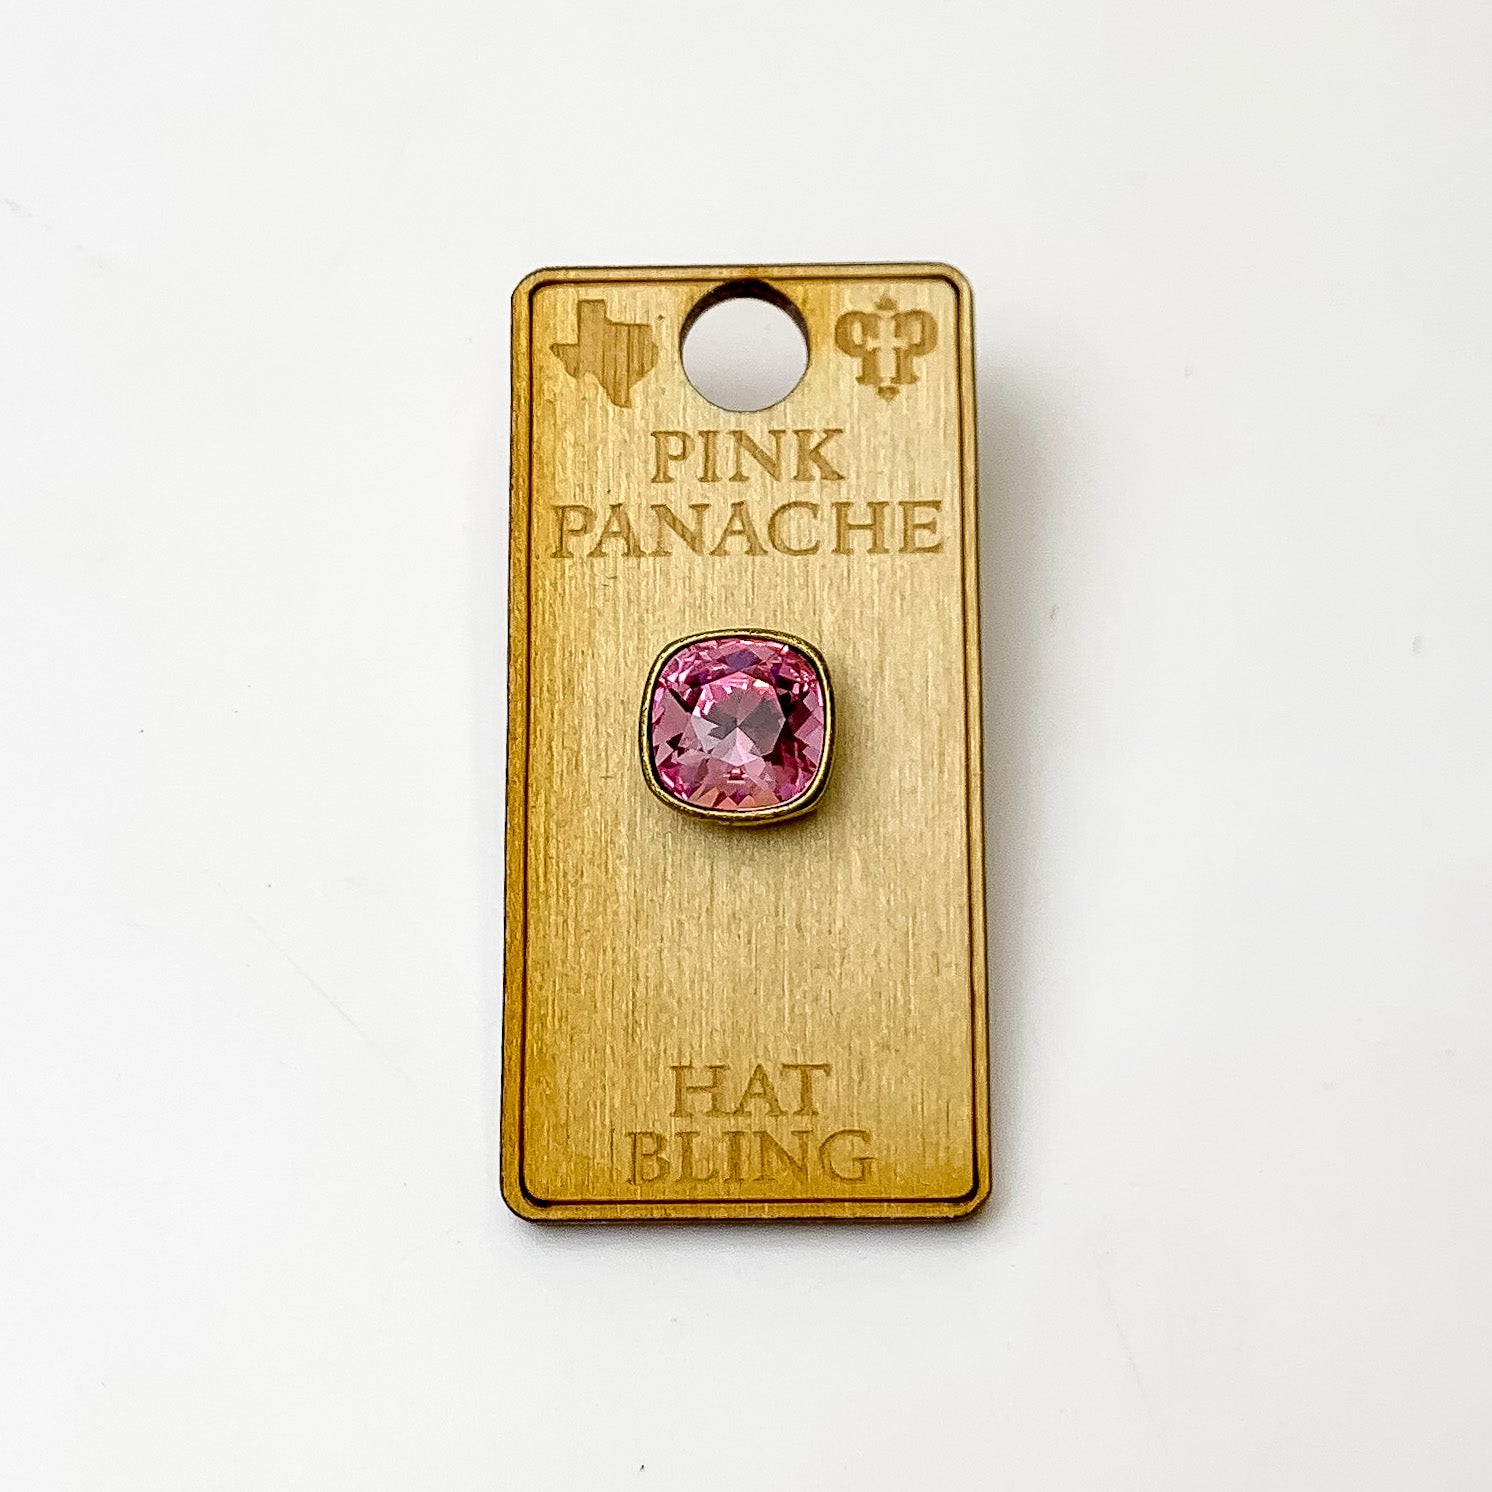 Bronze, square hat pin with a light rose cushion cut crystal. This hat pin is pictured on a wooden Pink Panache holder on a white background.